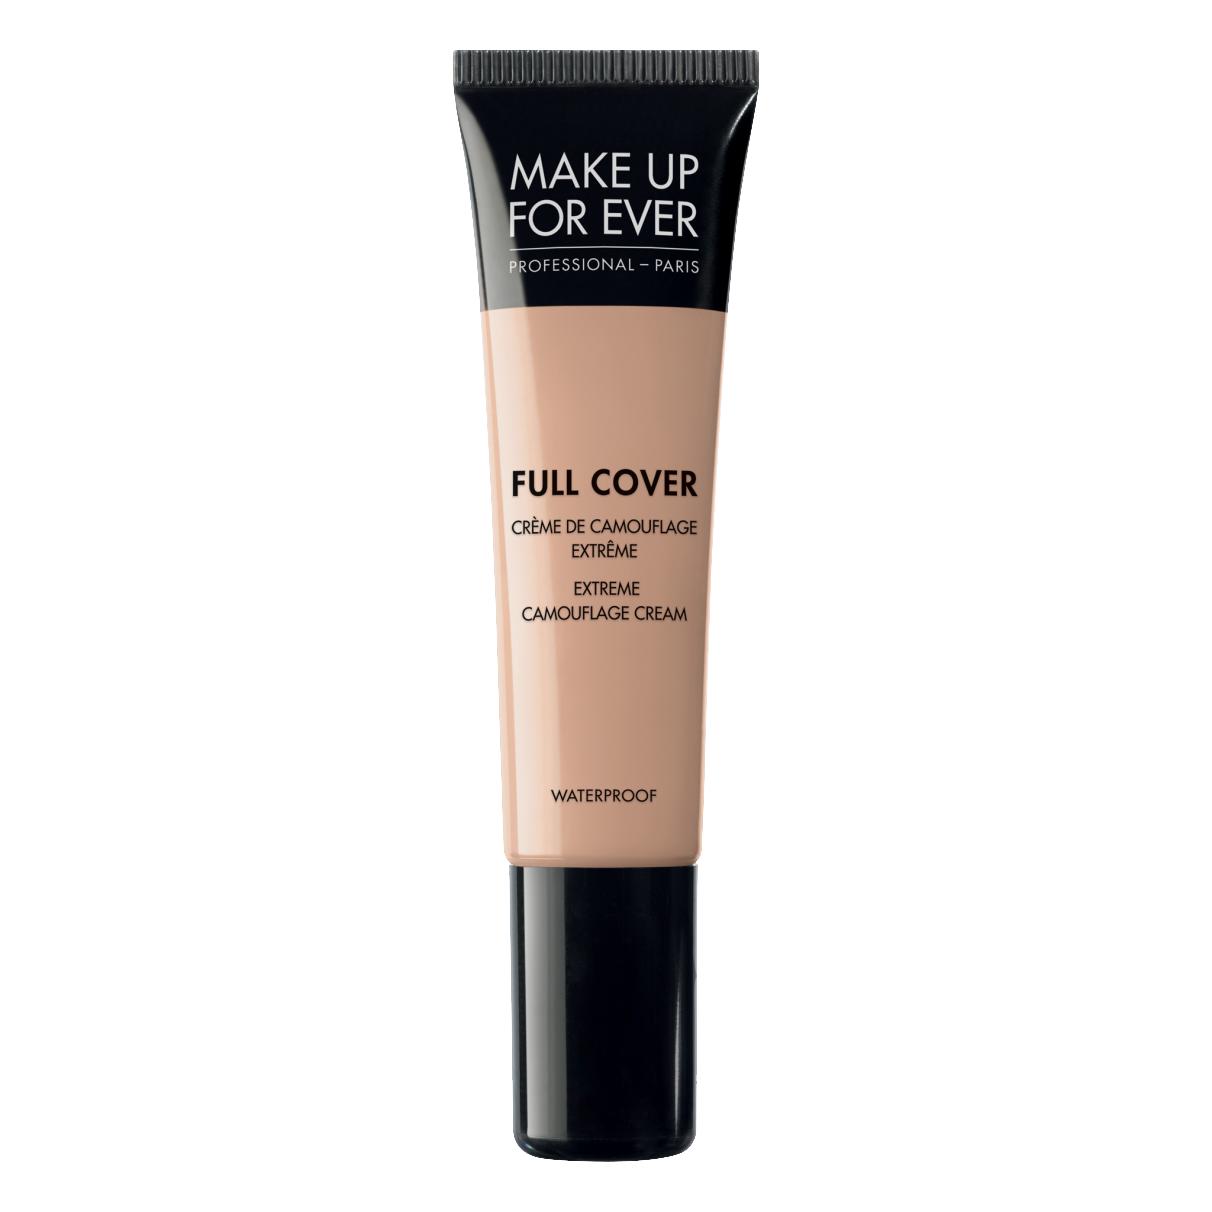 Makeup Forever Full Cover Extreme Camouflage Cream 6